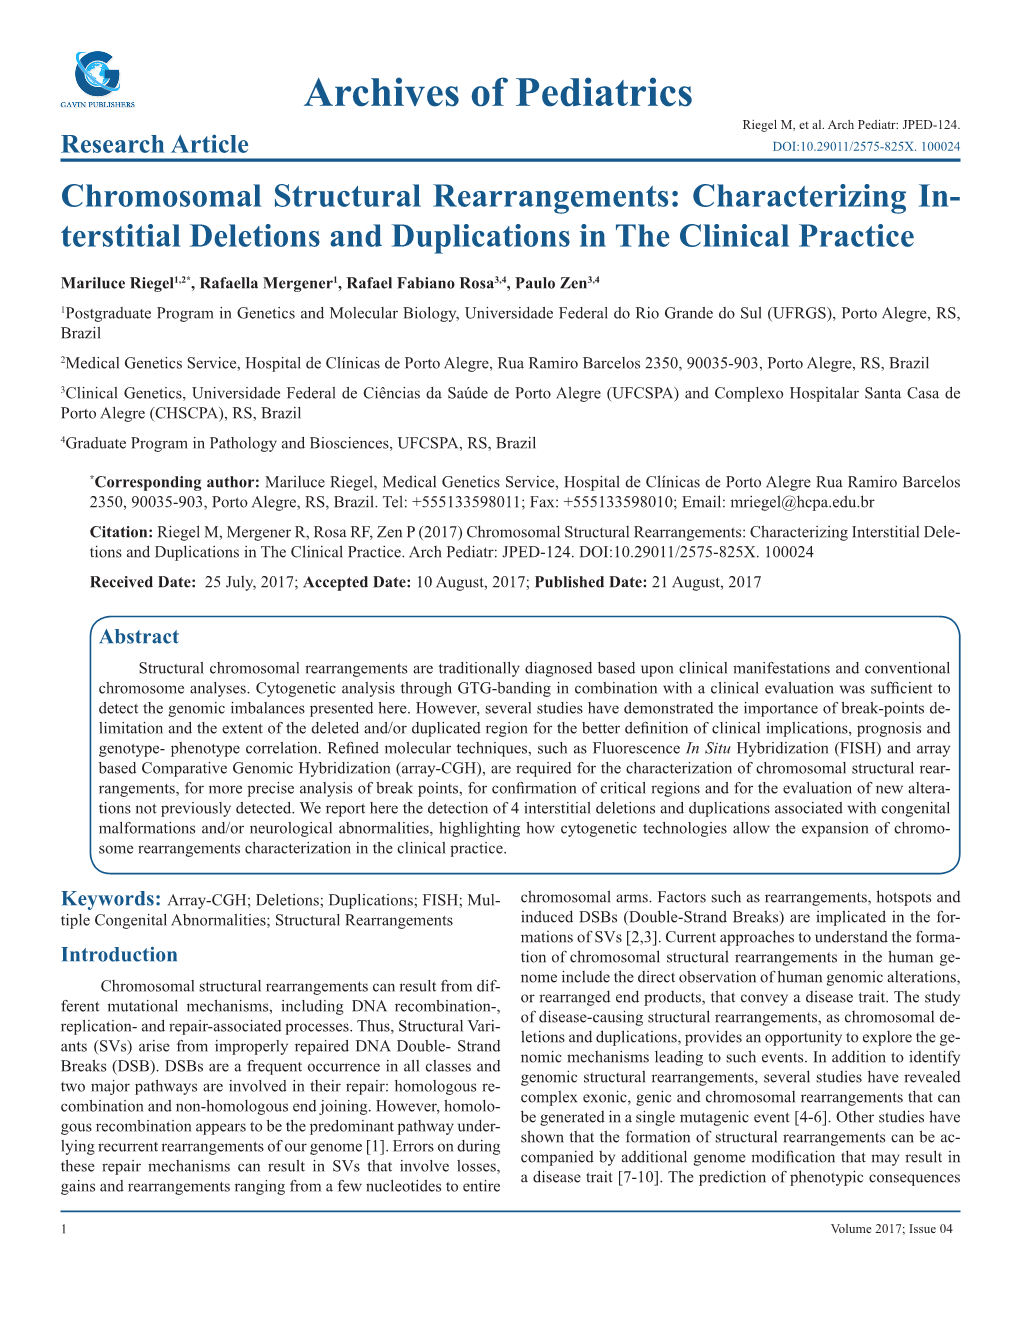 Chromosomal Structural Rearrangements: Characterizing In- Terstitial Deletions and Duplications in the Clinical Practice